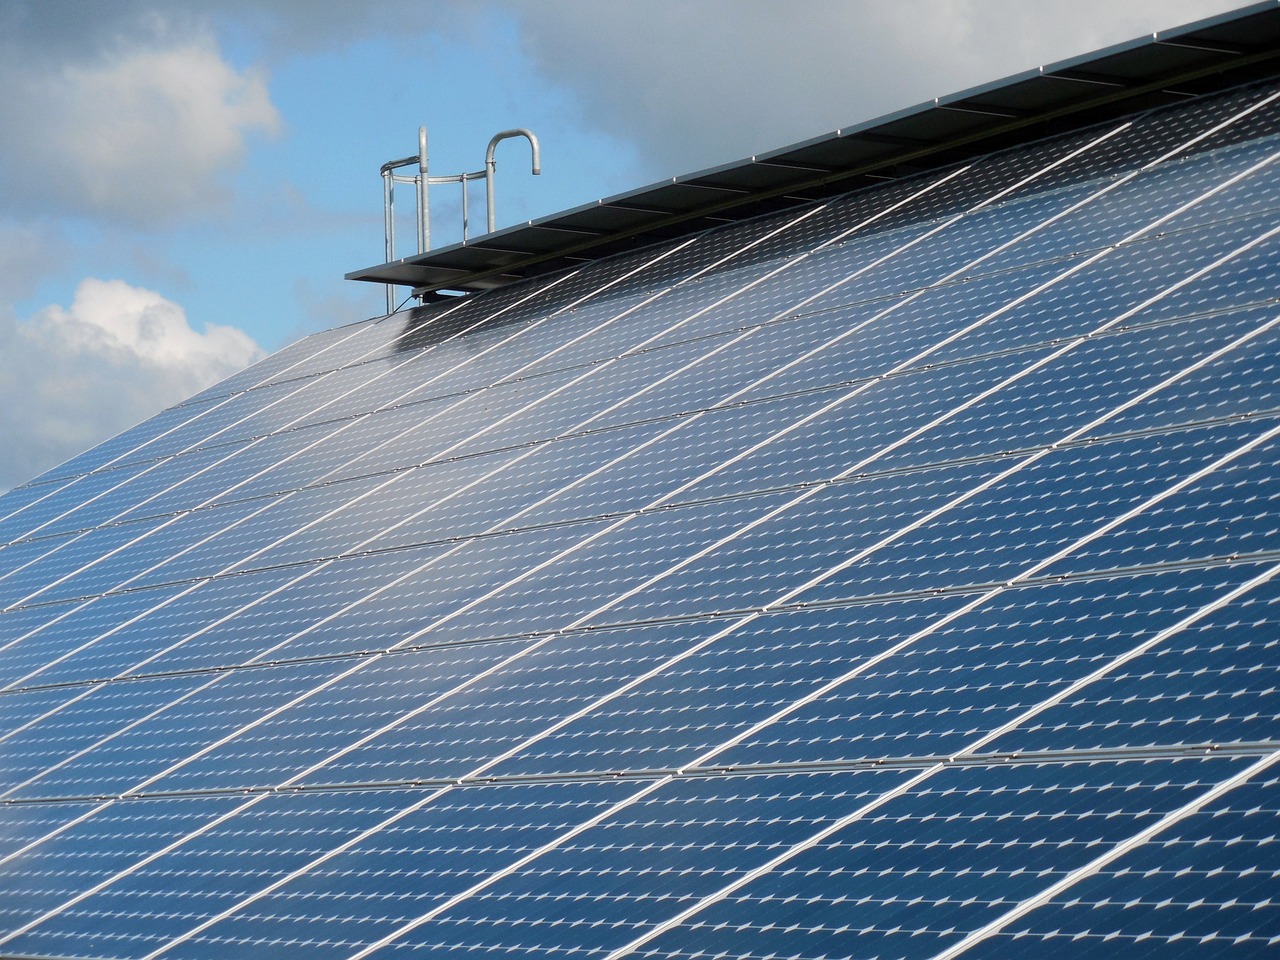 What Are The Benefits Of Solar Power?